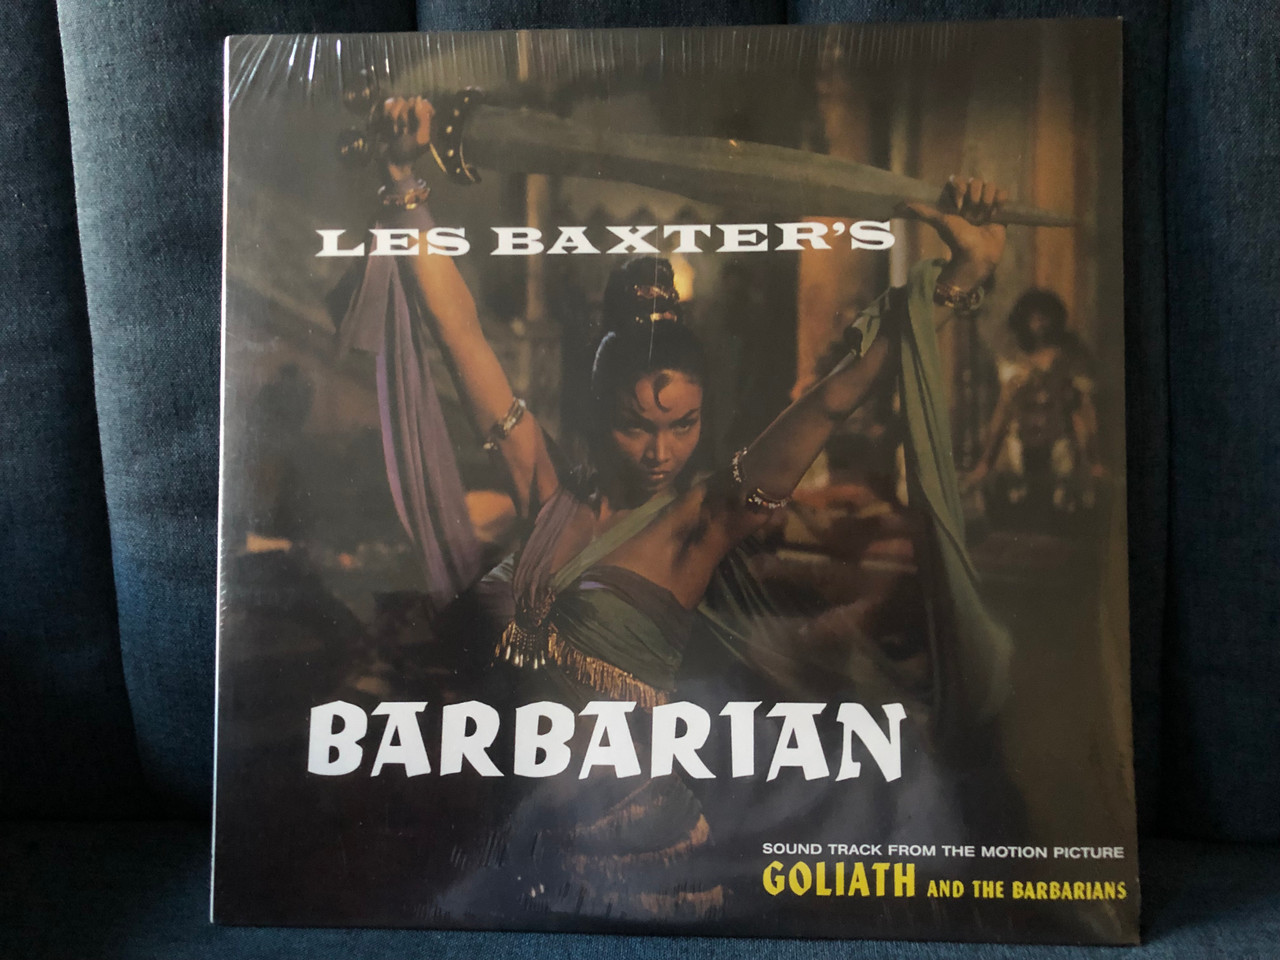 https://cdn10.bigcommerce.com/s-62bdpkt7pb/products/0/images/228448/Les_Baxters_Barbarian_Sound_Track_From_The_Motion_Picture_Goliath_And_The_Barbarians_So_Far_Out_LP_2014_OUT5018LP_1__71004.1653315463.1280.1280.JPG?c=2&_gl=1*vu2fy2*_ga*MjA2NTIxMjE2MC4xNTkwNTEyNTMy*_ga_WS2VZYPC6G*MTY1MzMxMzg4Mi40MDcuMS4xNjUzMzE1MTE4LjQ5